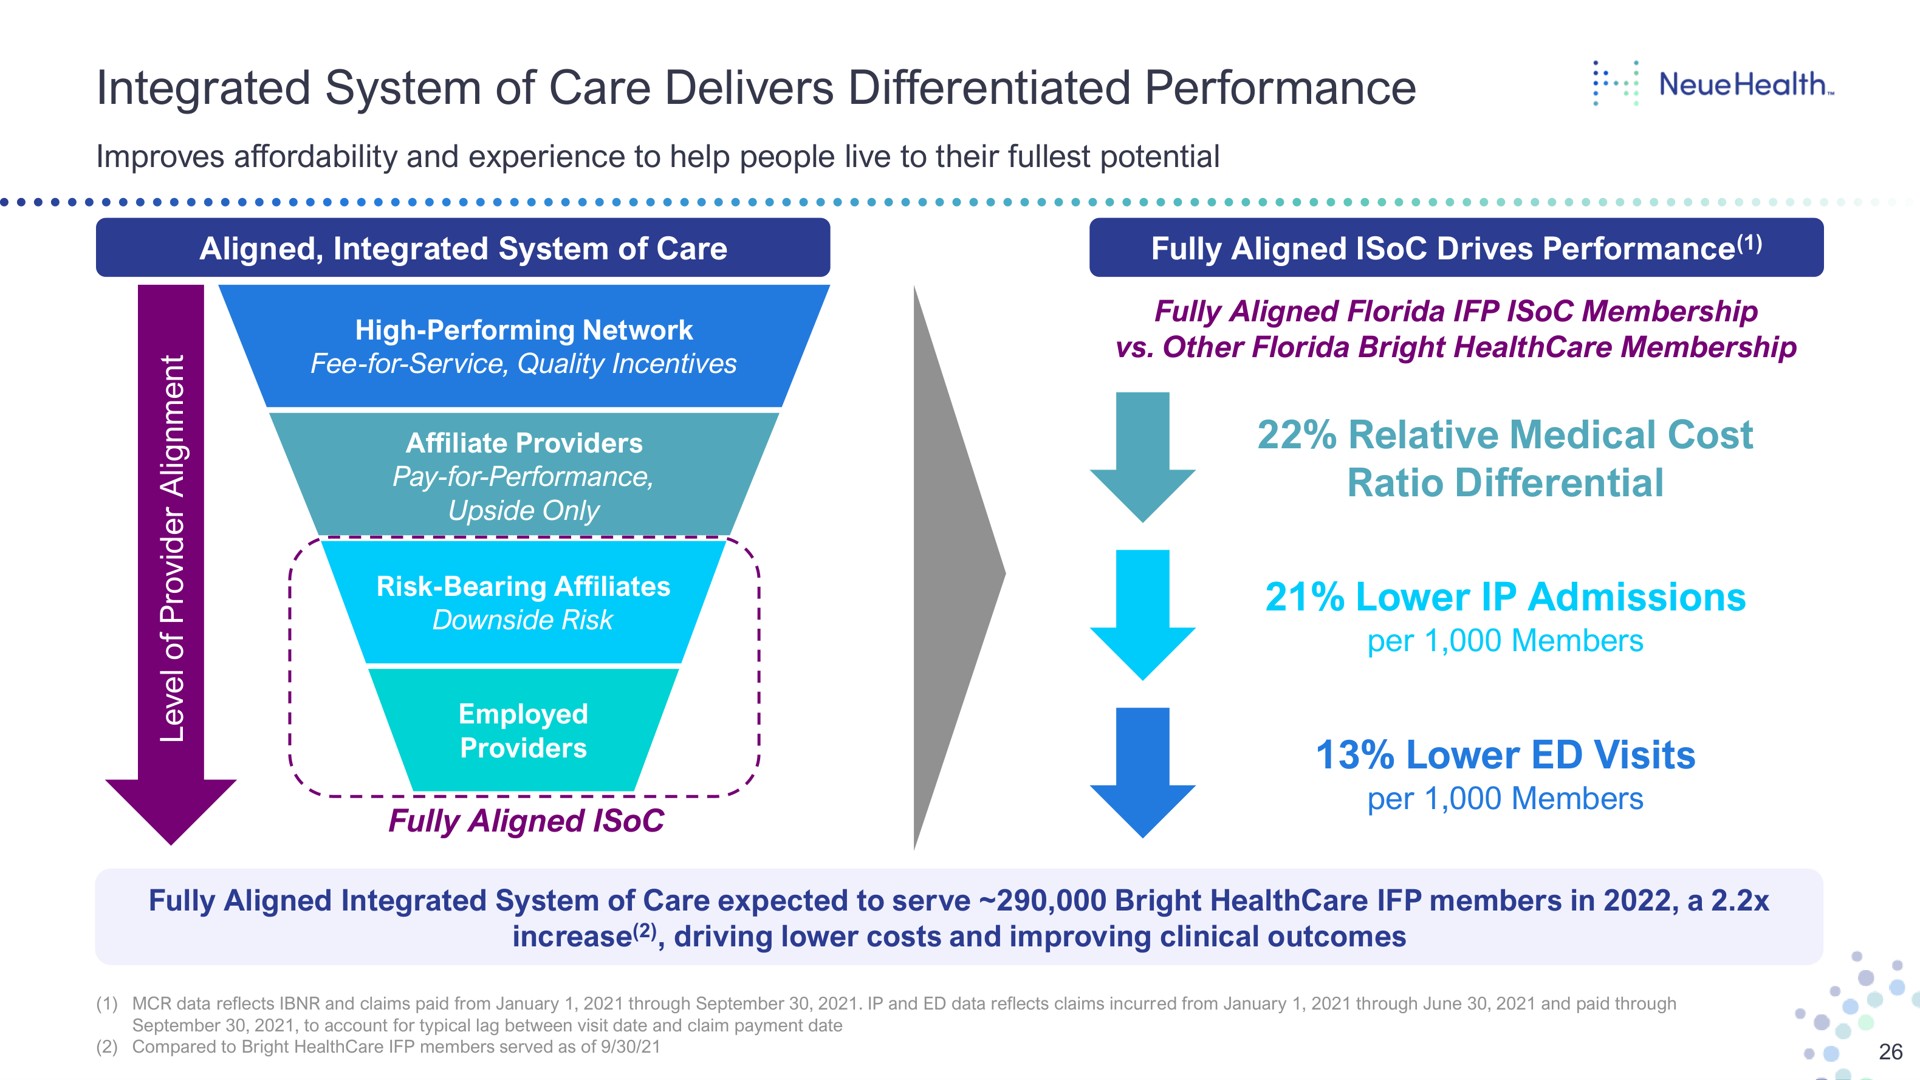 integrated system of care delivers differentiated performance relative medical cost ratio differential lower admissions lower visits improves and experience to help people live to their potential aligned fully aligned drives high performing network fully aligned membership other bright membership affiliate providers ease upside only risk bearing affiliates deul employed fully aligned per members embers per fully aligned expected to serve bright members in a increase driving costs and improving clinical outcomes | Bright Health Group